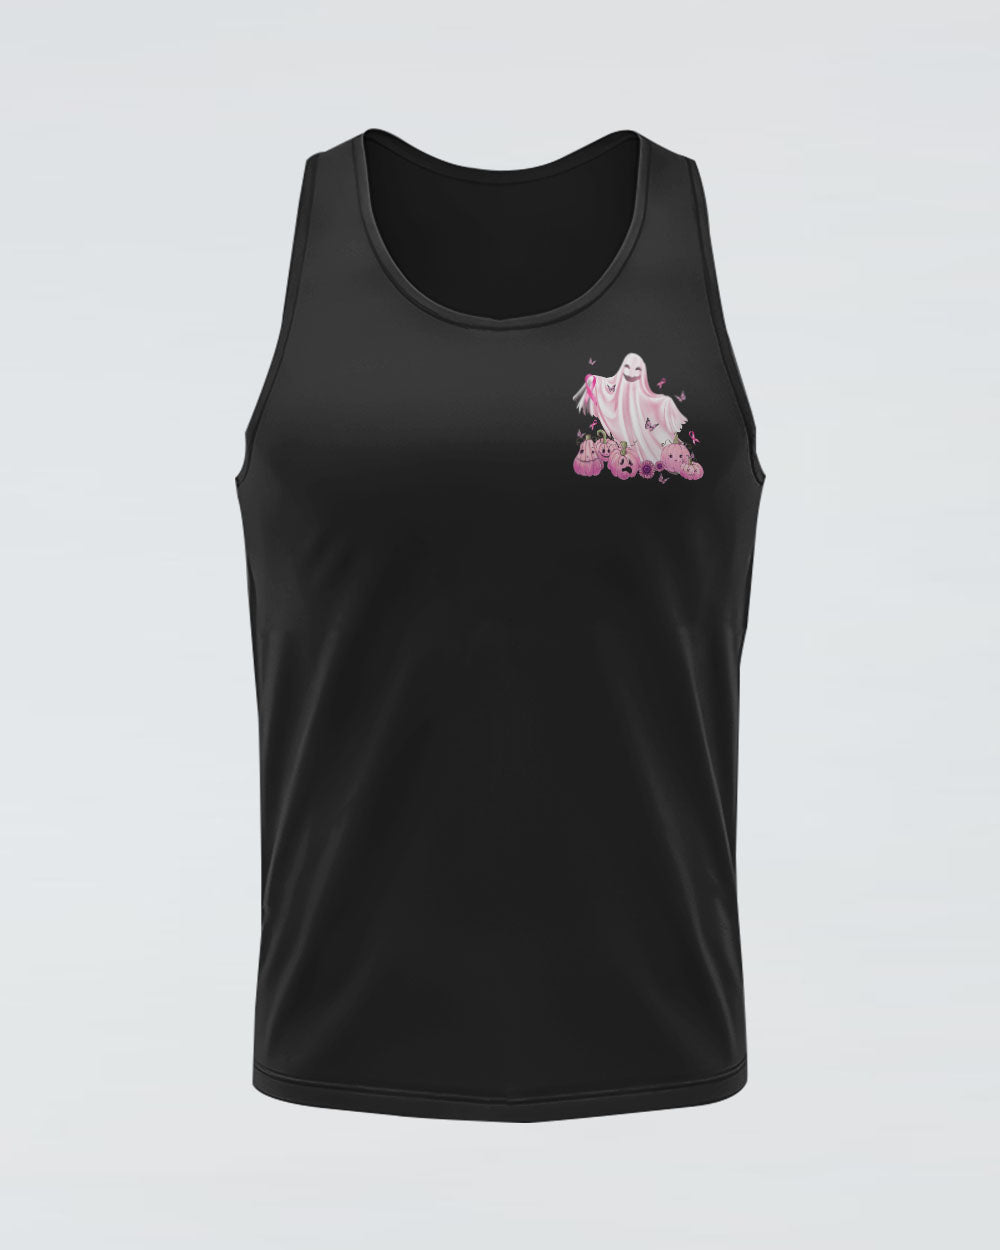 No One Fights Alone Boo Halloween Women's Breast Cancer Awareness Tanks